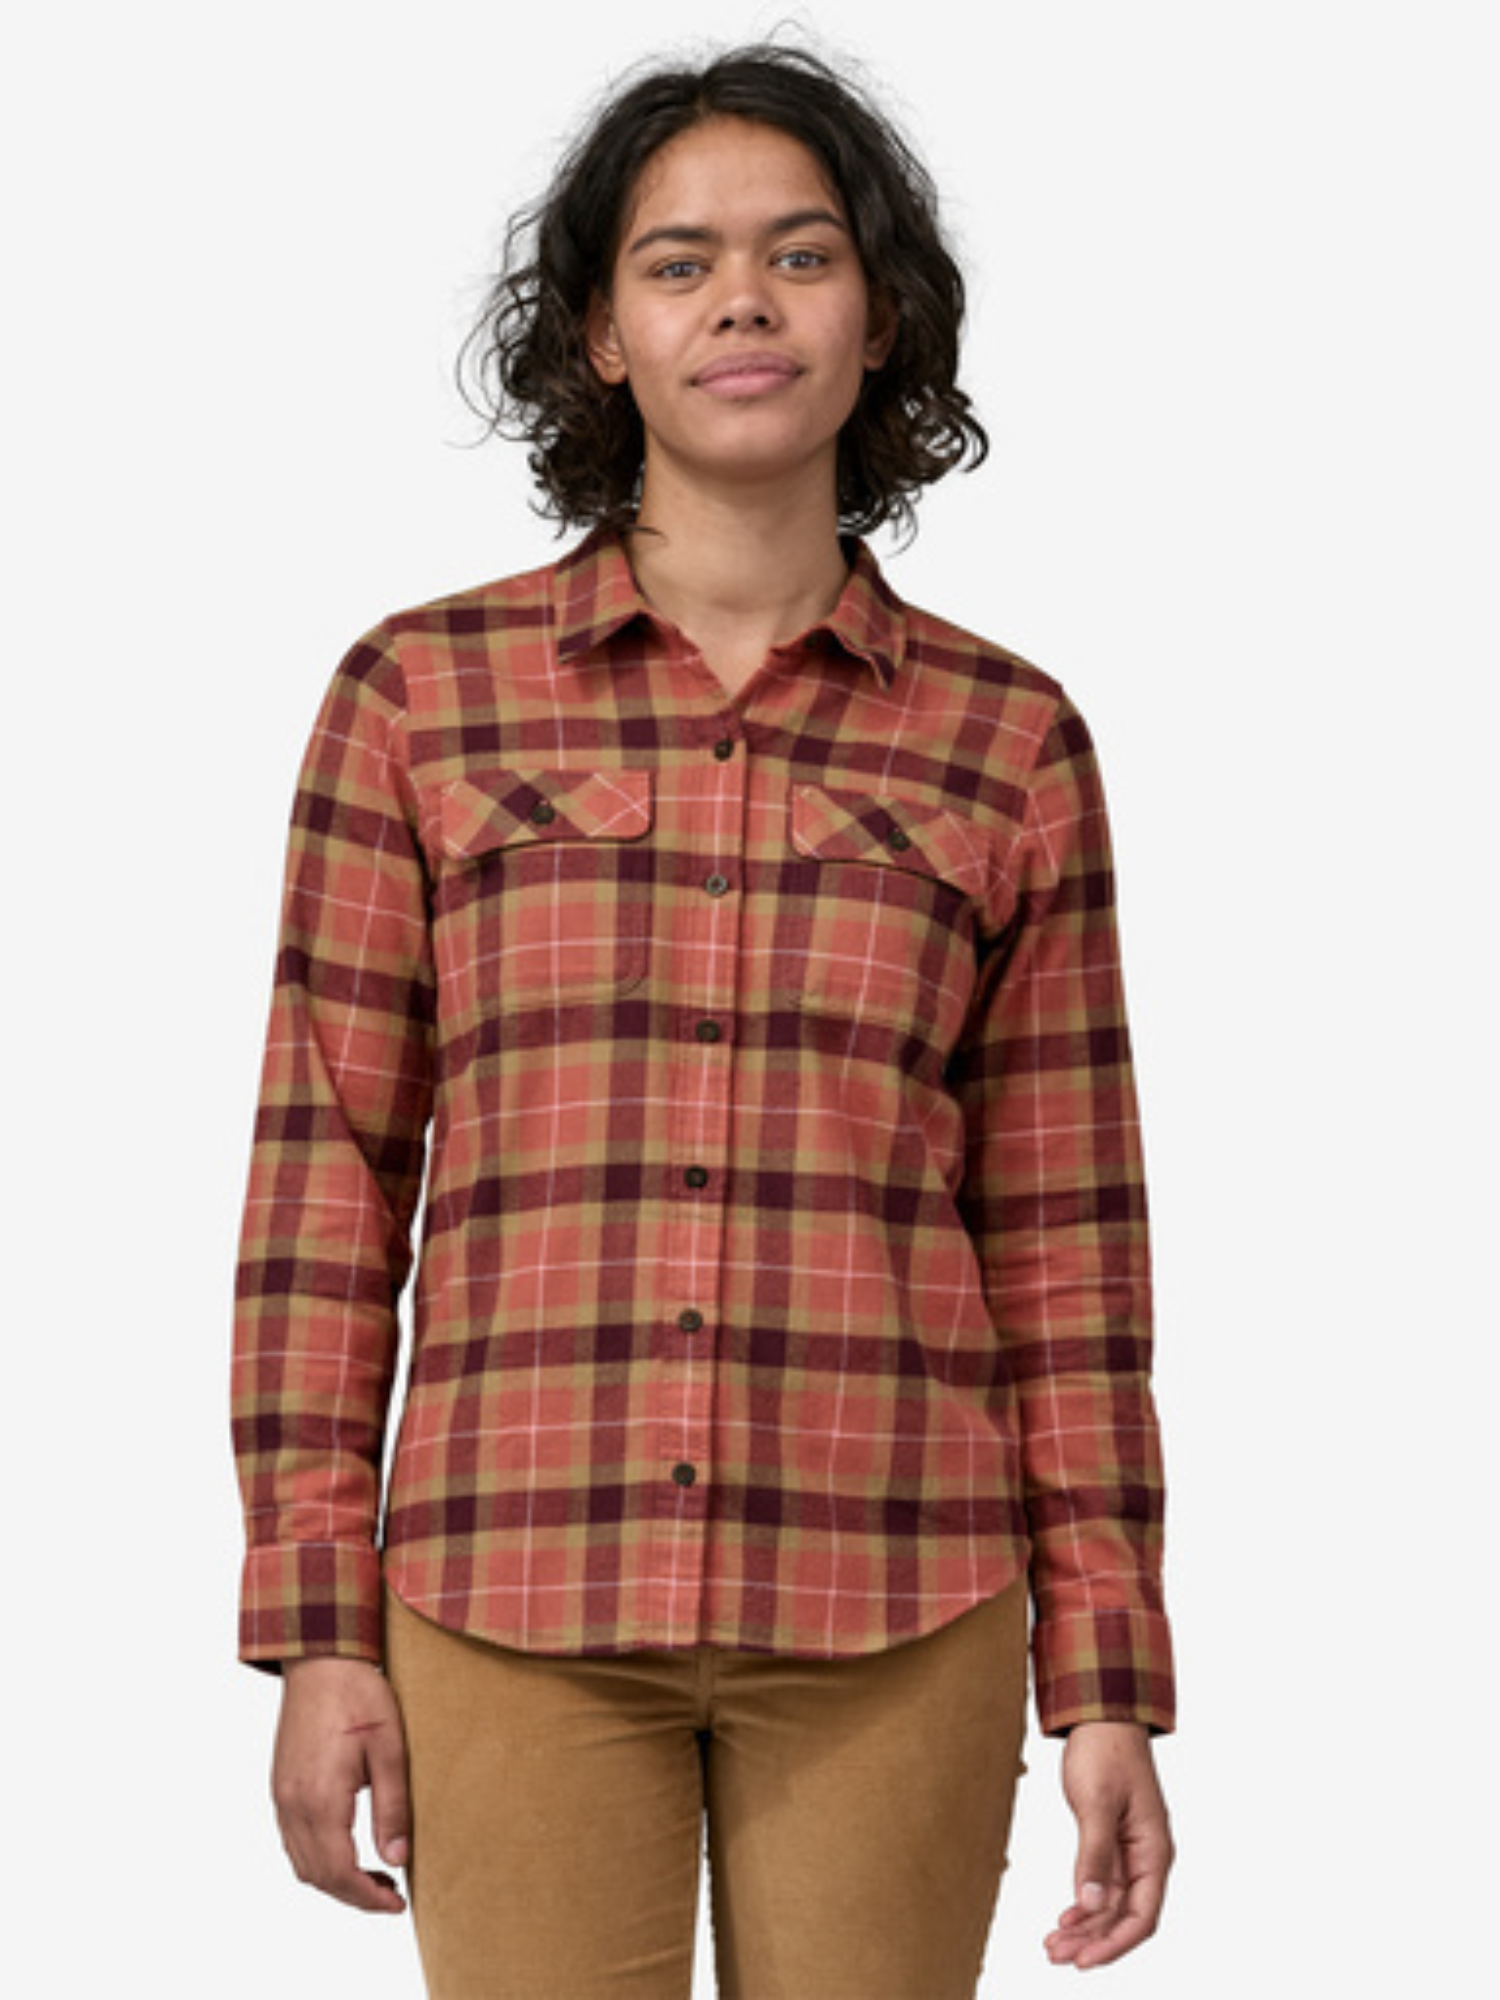 Patagonia Women's Long-Sleeved Organic Cotton Midweight Fjord Flannel Shirt - Vista - Burl Red